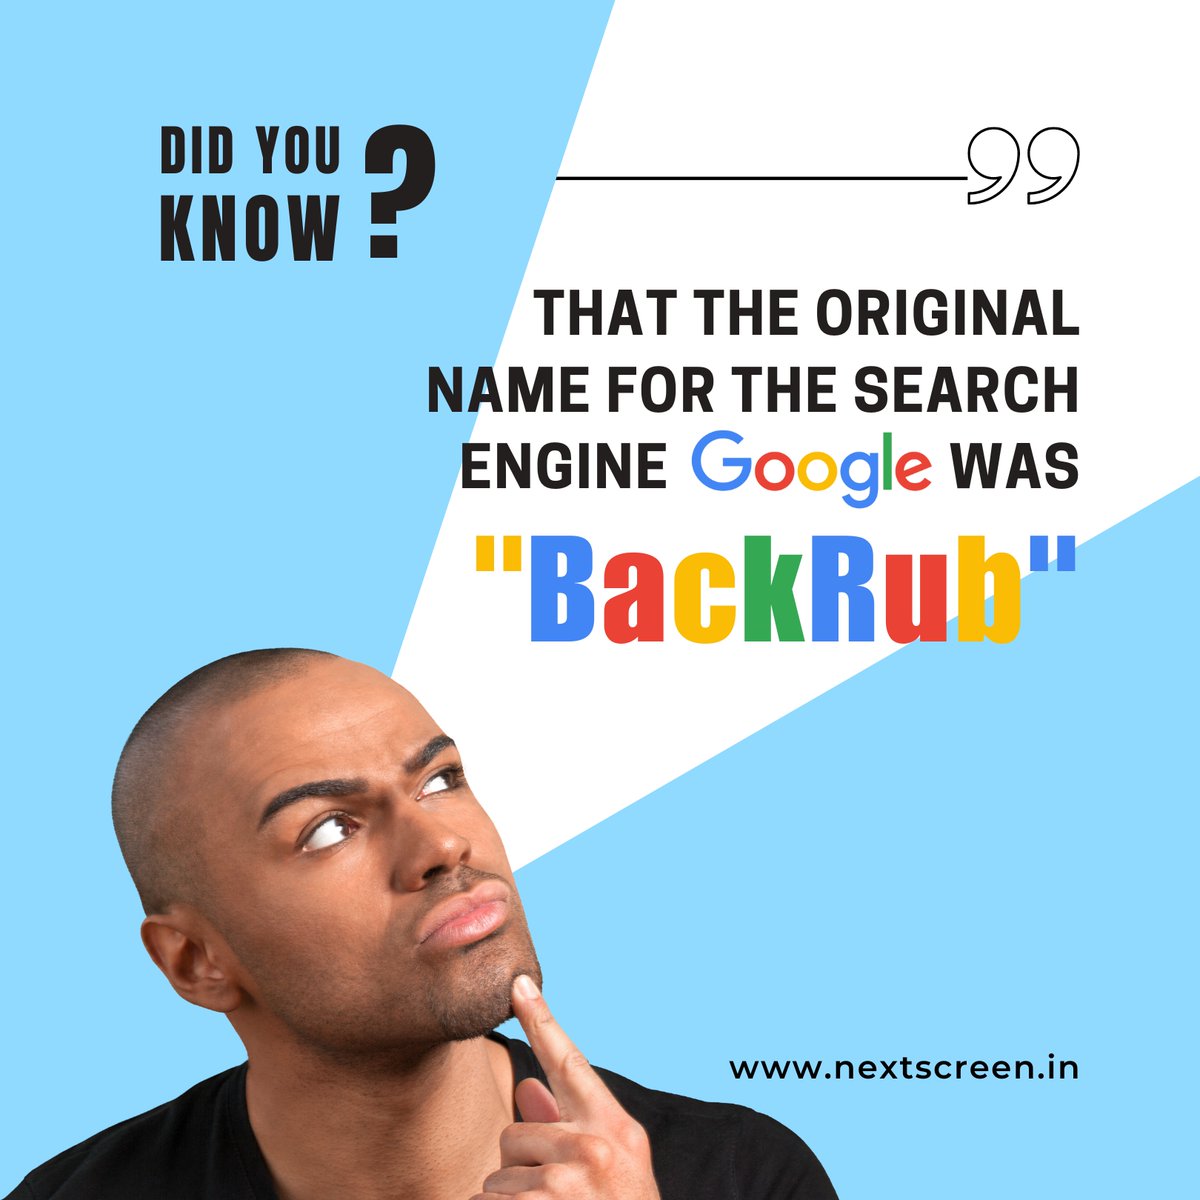 💡 Interesting Fact : 7
Did you know that the original name for the search engine Google was 'Backrub'?
.
.
.
#interest #interesting #interestingfacts #fact #facts #factsyoudidntknow #DidYouKnow #didyouknow #didyouknowfacts #virals #followers #highlights #nextscreeninfotech